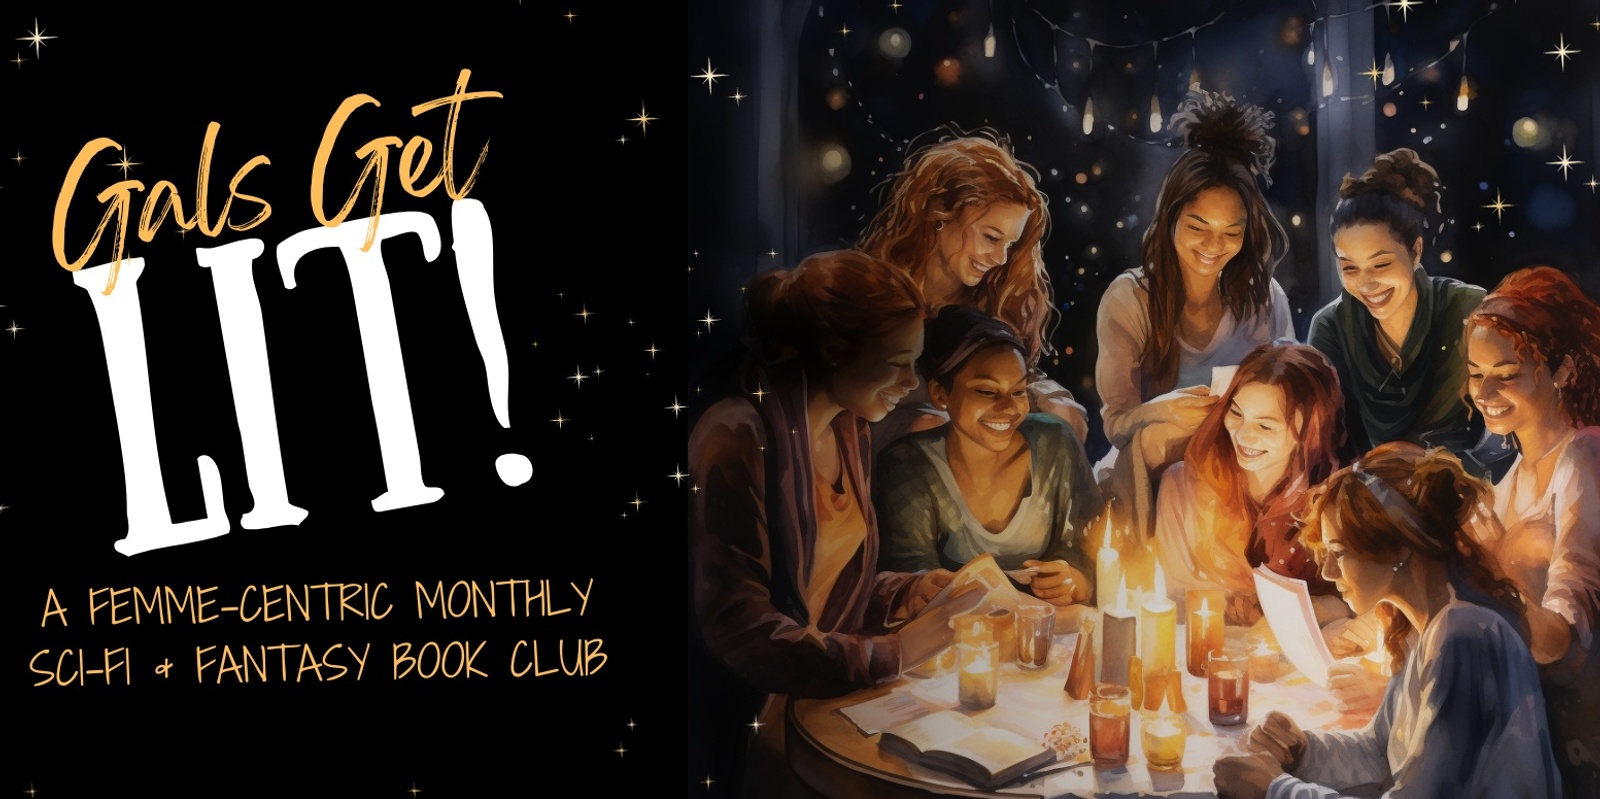 Banner image for Gals Get Lit! A Femme-Centric Monthly Sci-Fi + Fantasy Book Club